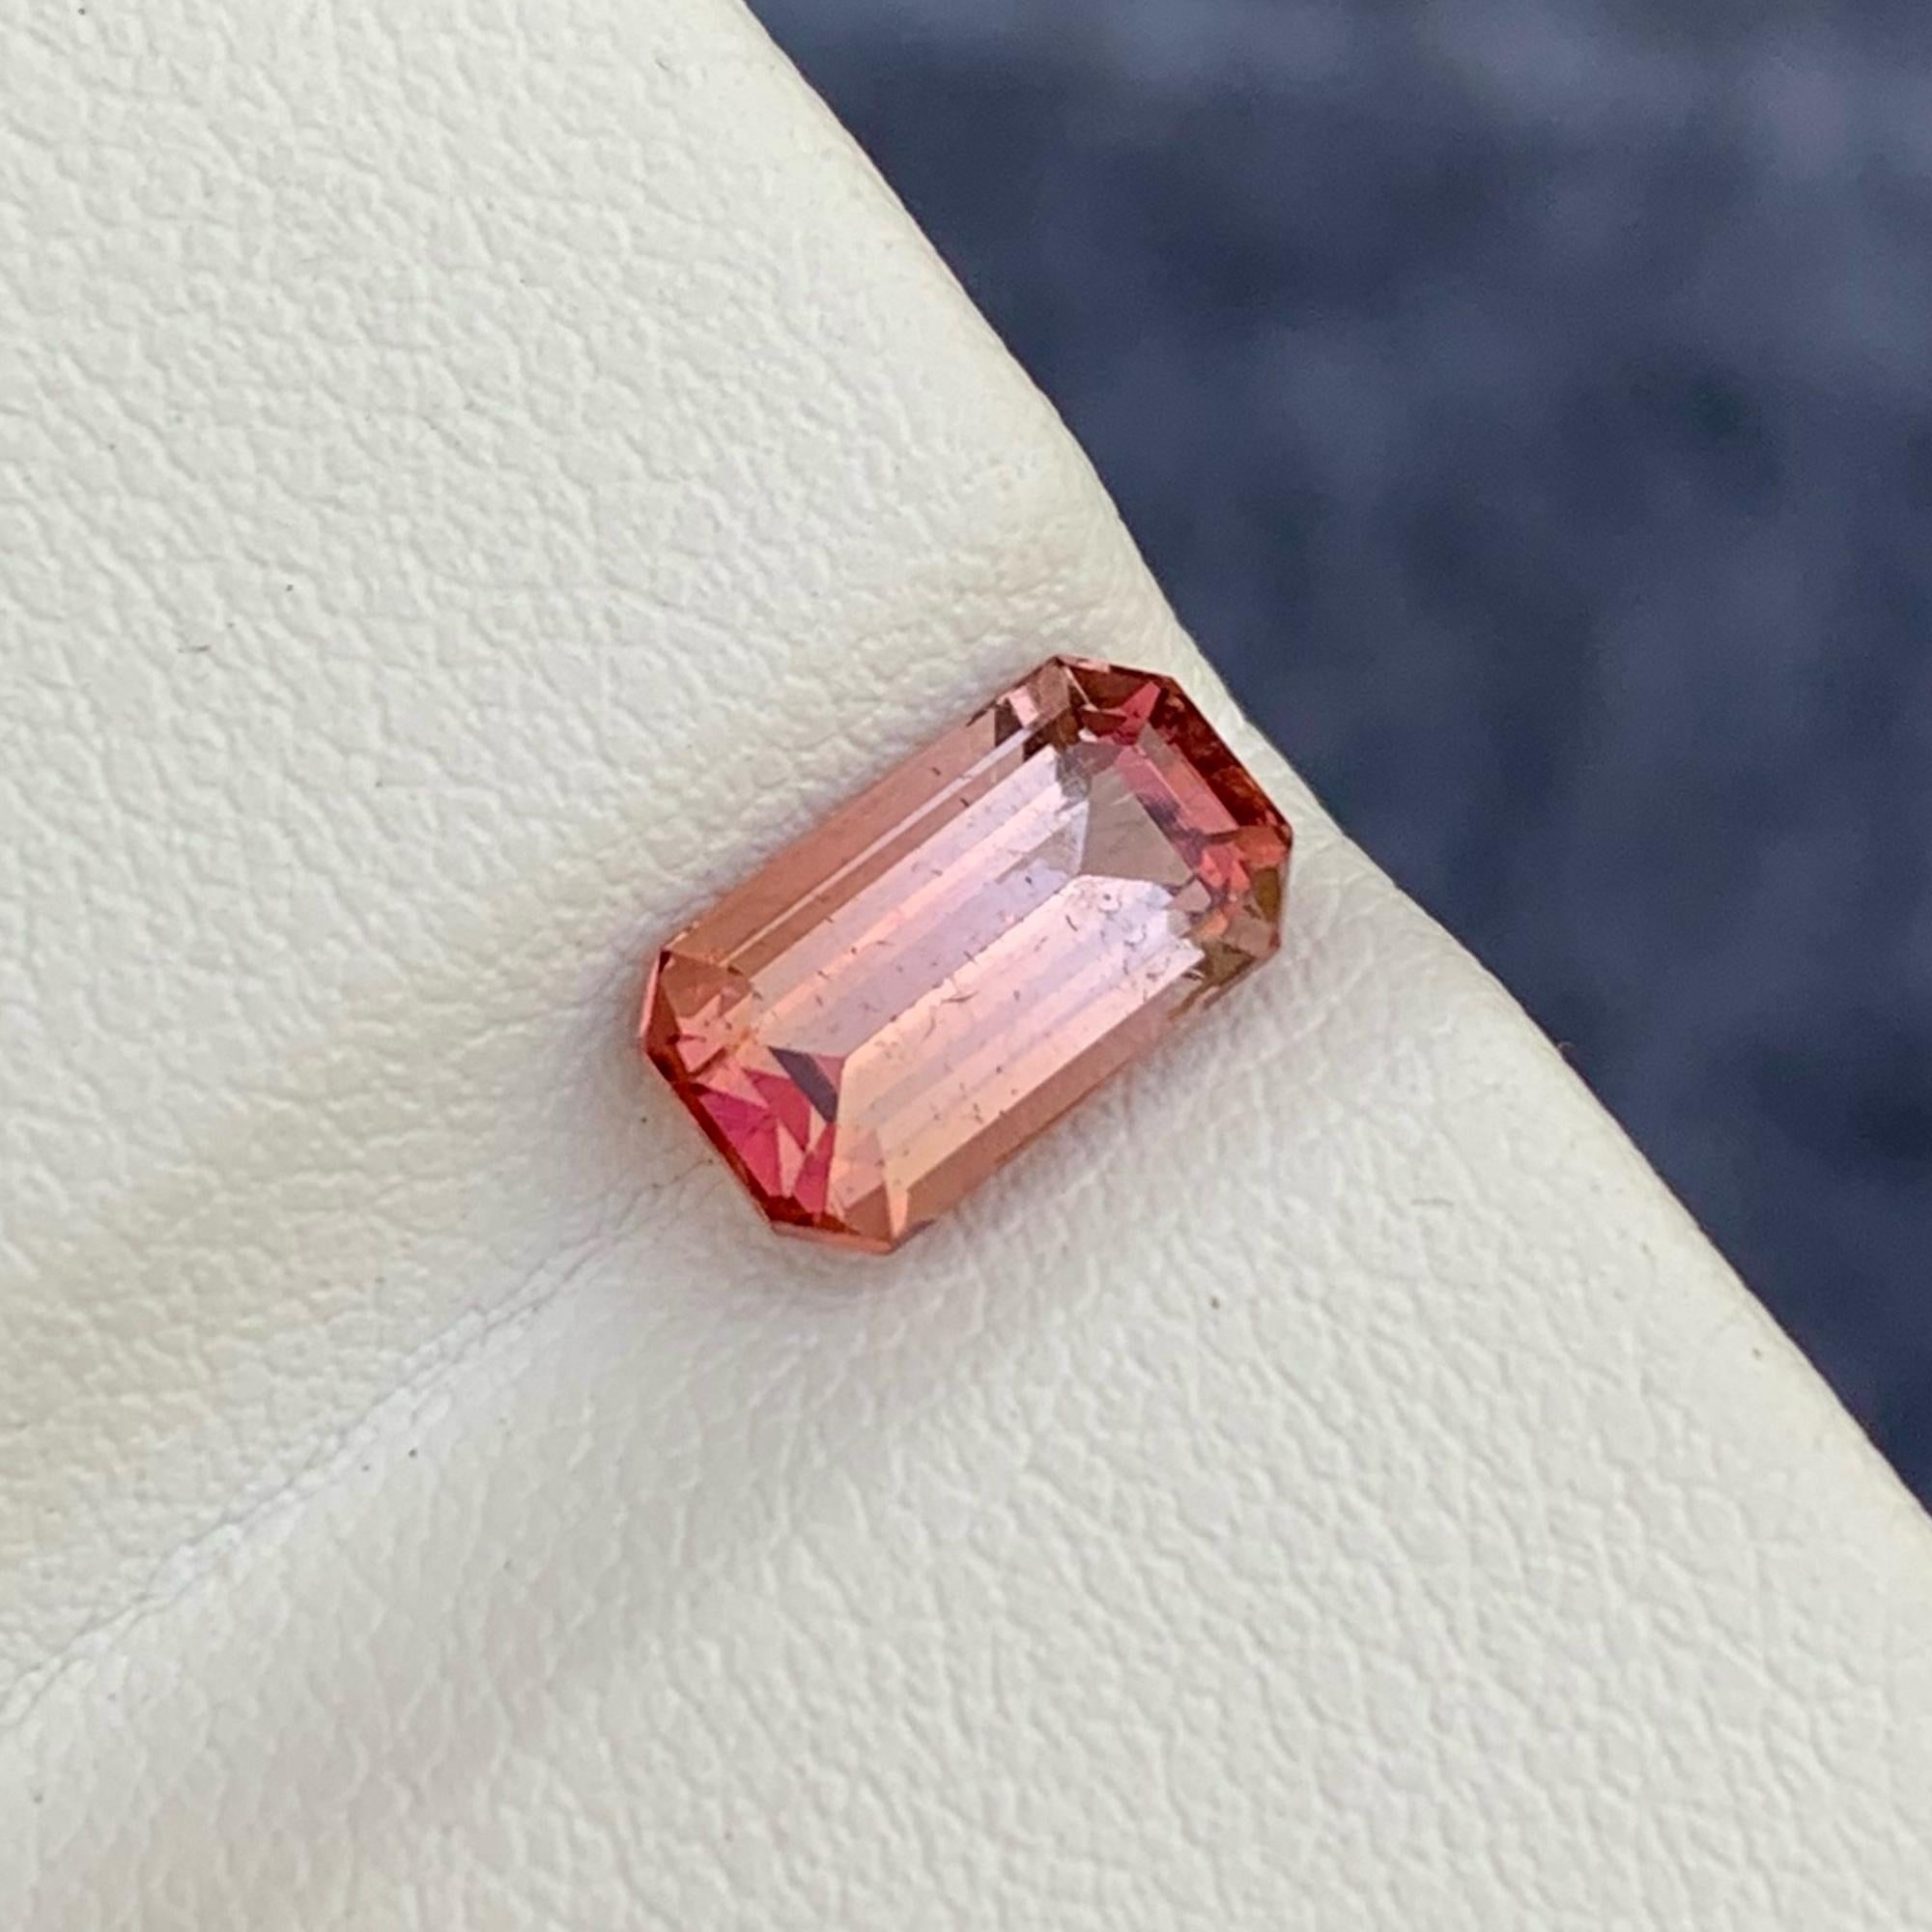 Product Name Brownish Red Tourmaline Stone
Weight 1.85 carats
Dimensions 9.1 x 5.2 x 4.5 mm
Treatment Heated
Locality Africa
Clarity SI
Shape Octagon
Cut Emerald




Indulge in the earthy allure of the Brownish Red Tourmaline, a 1.85-carat natural